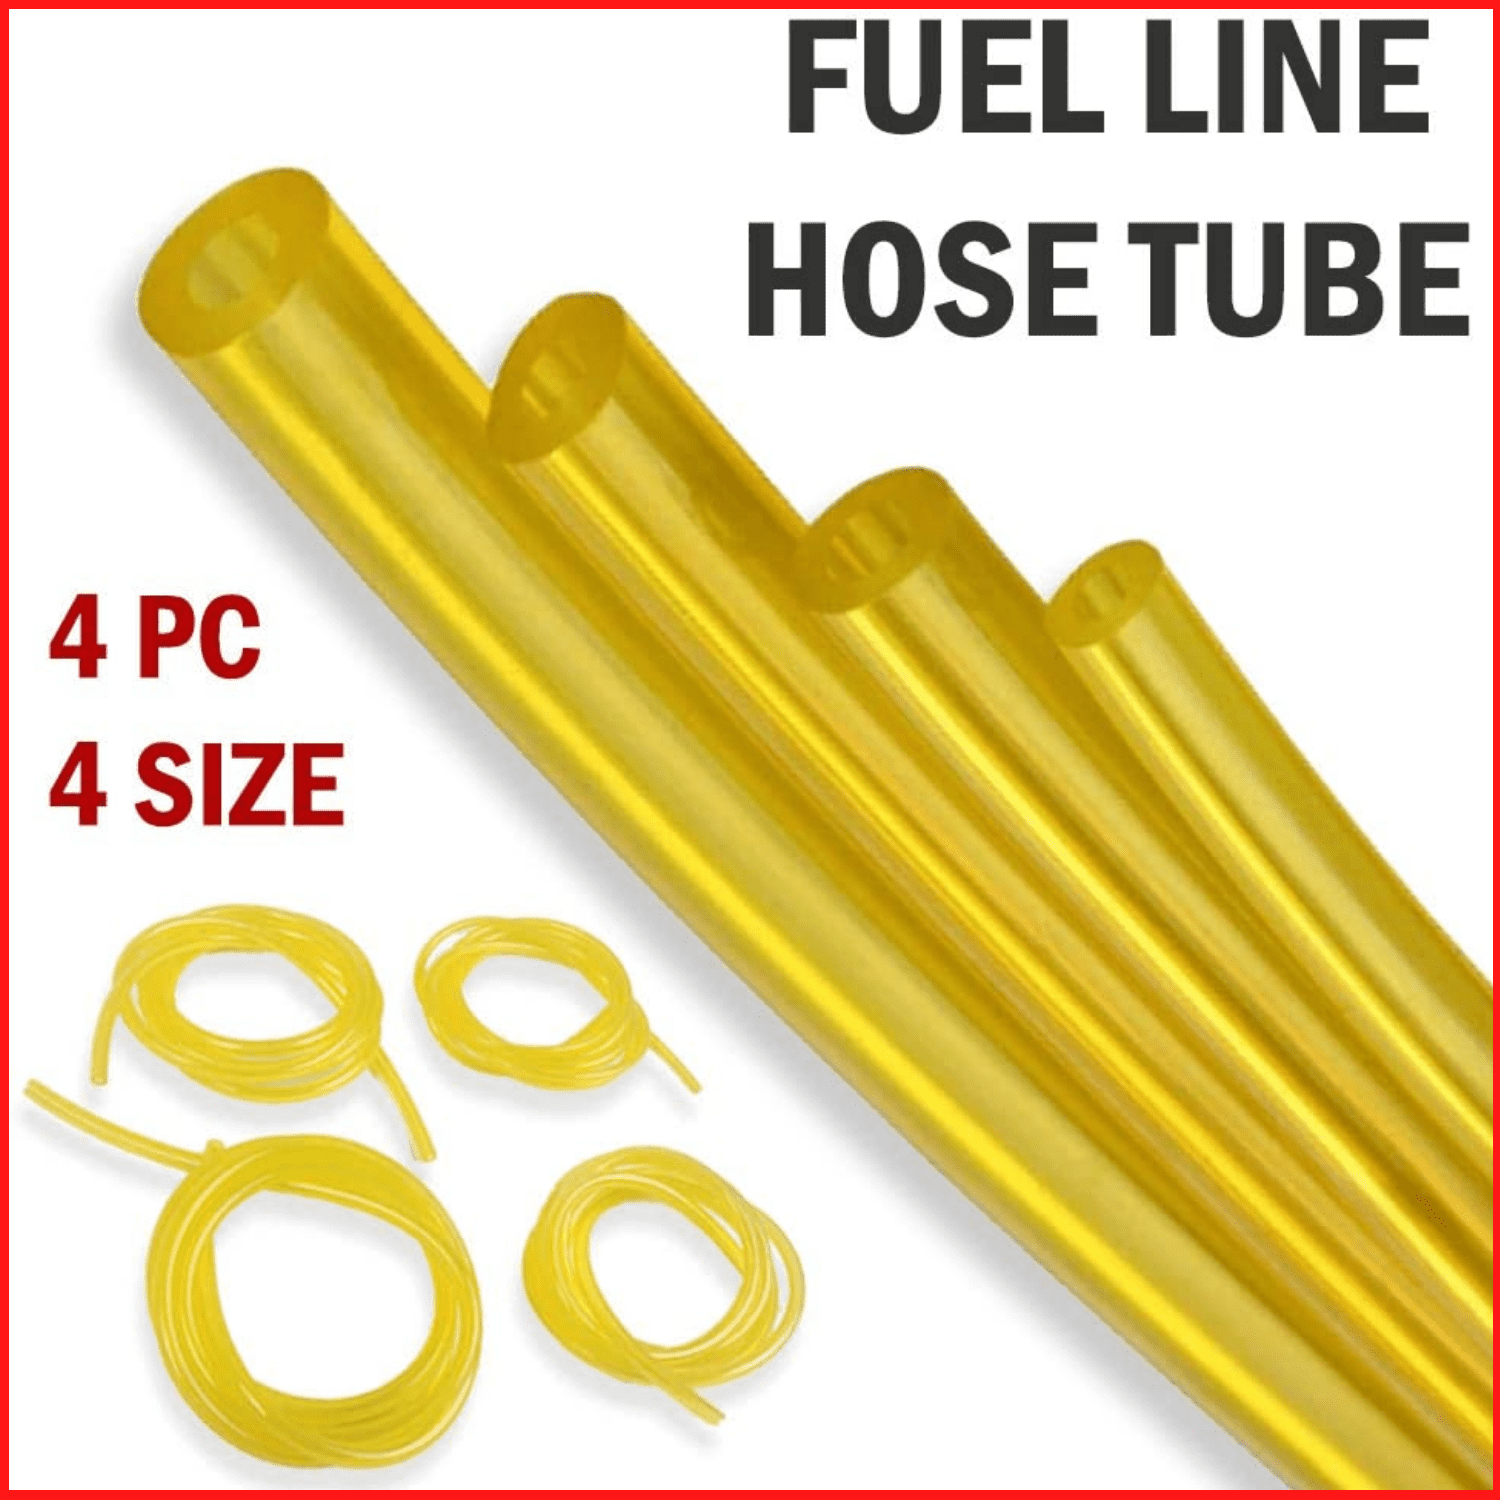 4X Petrol Fuel Gas Line Pipe Hose Tube For Trimmer Chainsaw Blower Weed Whackers 